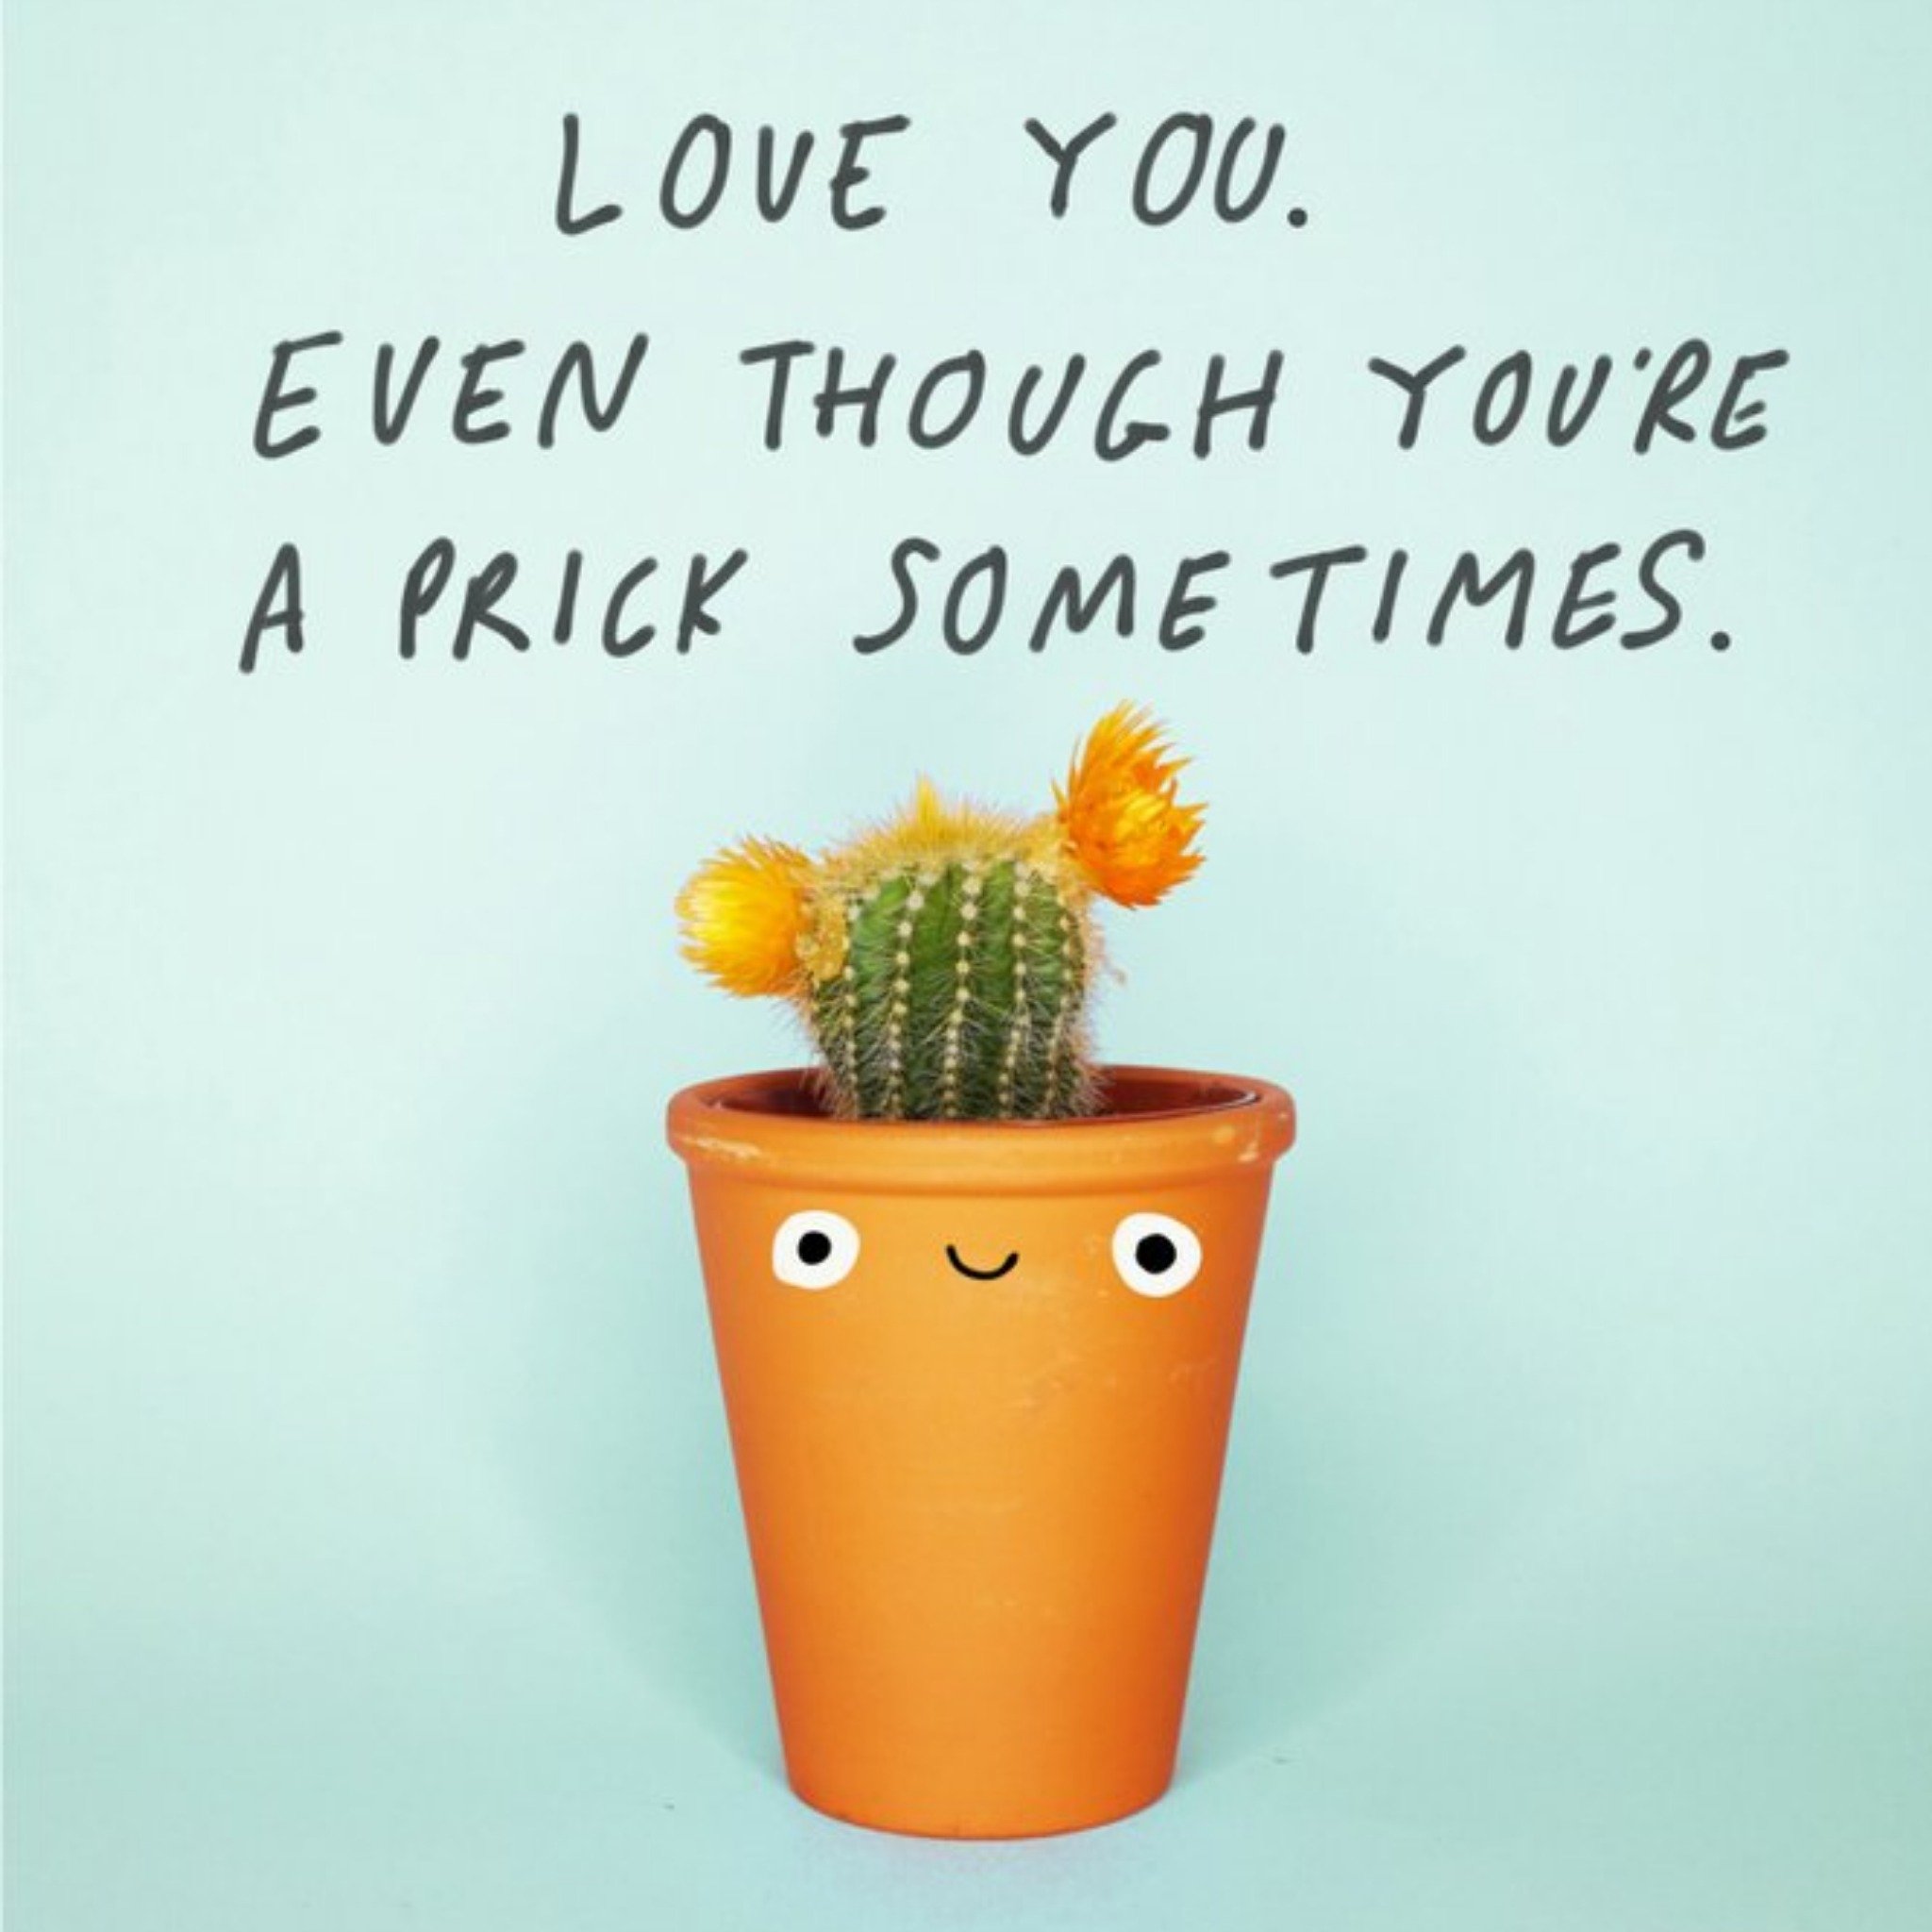 Jolly Awesome Love You Prick Card, Large